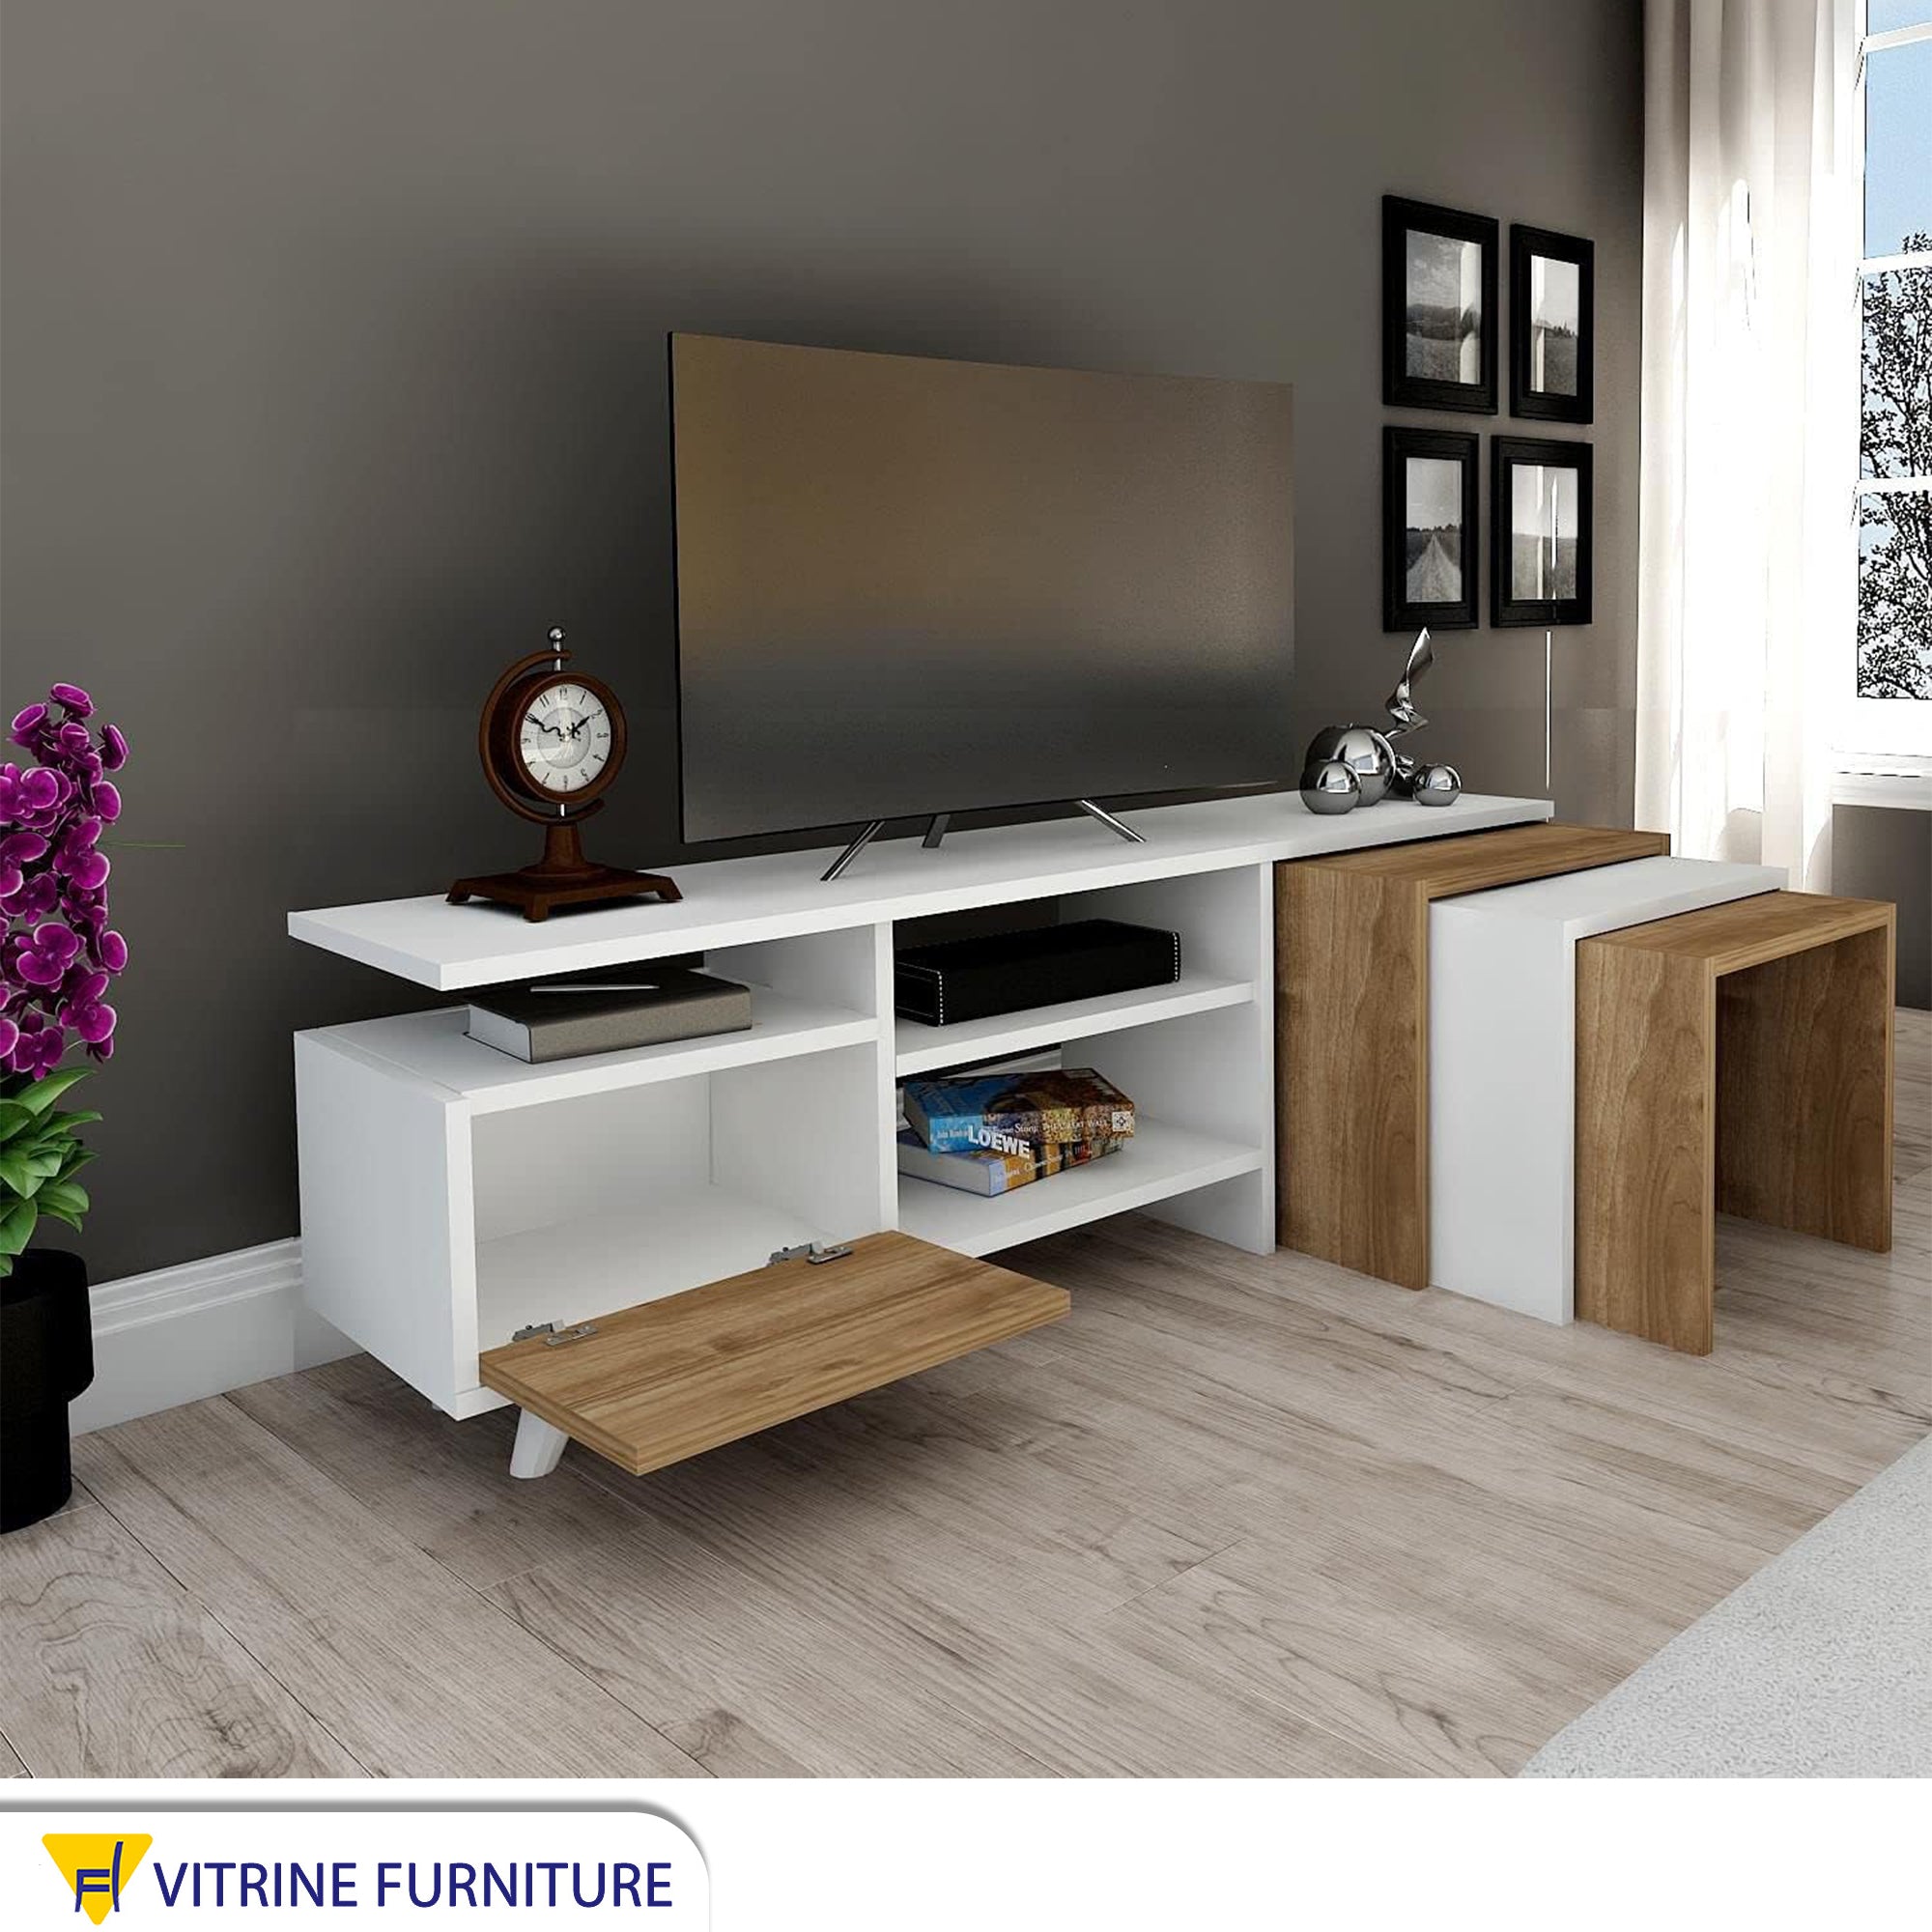 TV table in white and wooden color